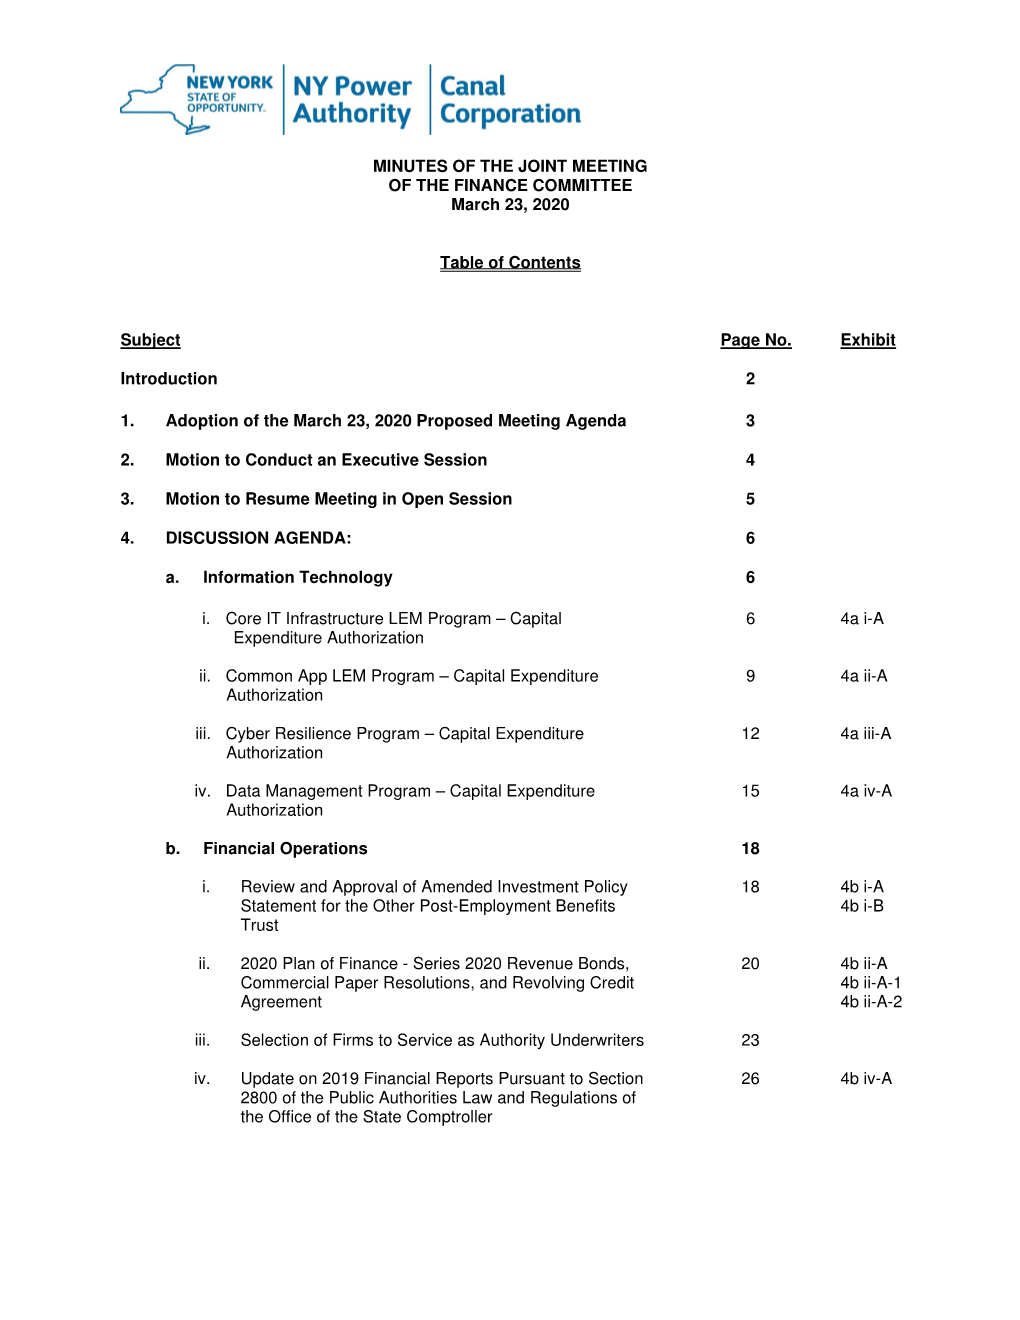 5/21/2020 Finance Committee Meeting Minutes March 23, 2020